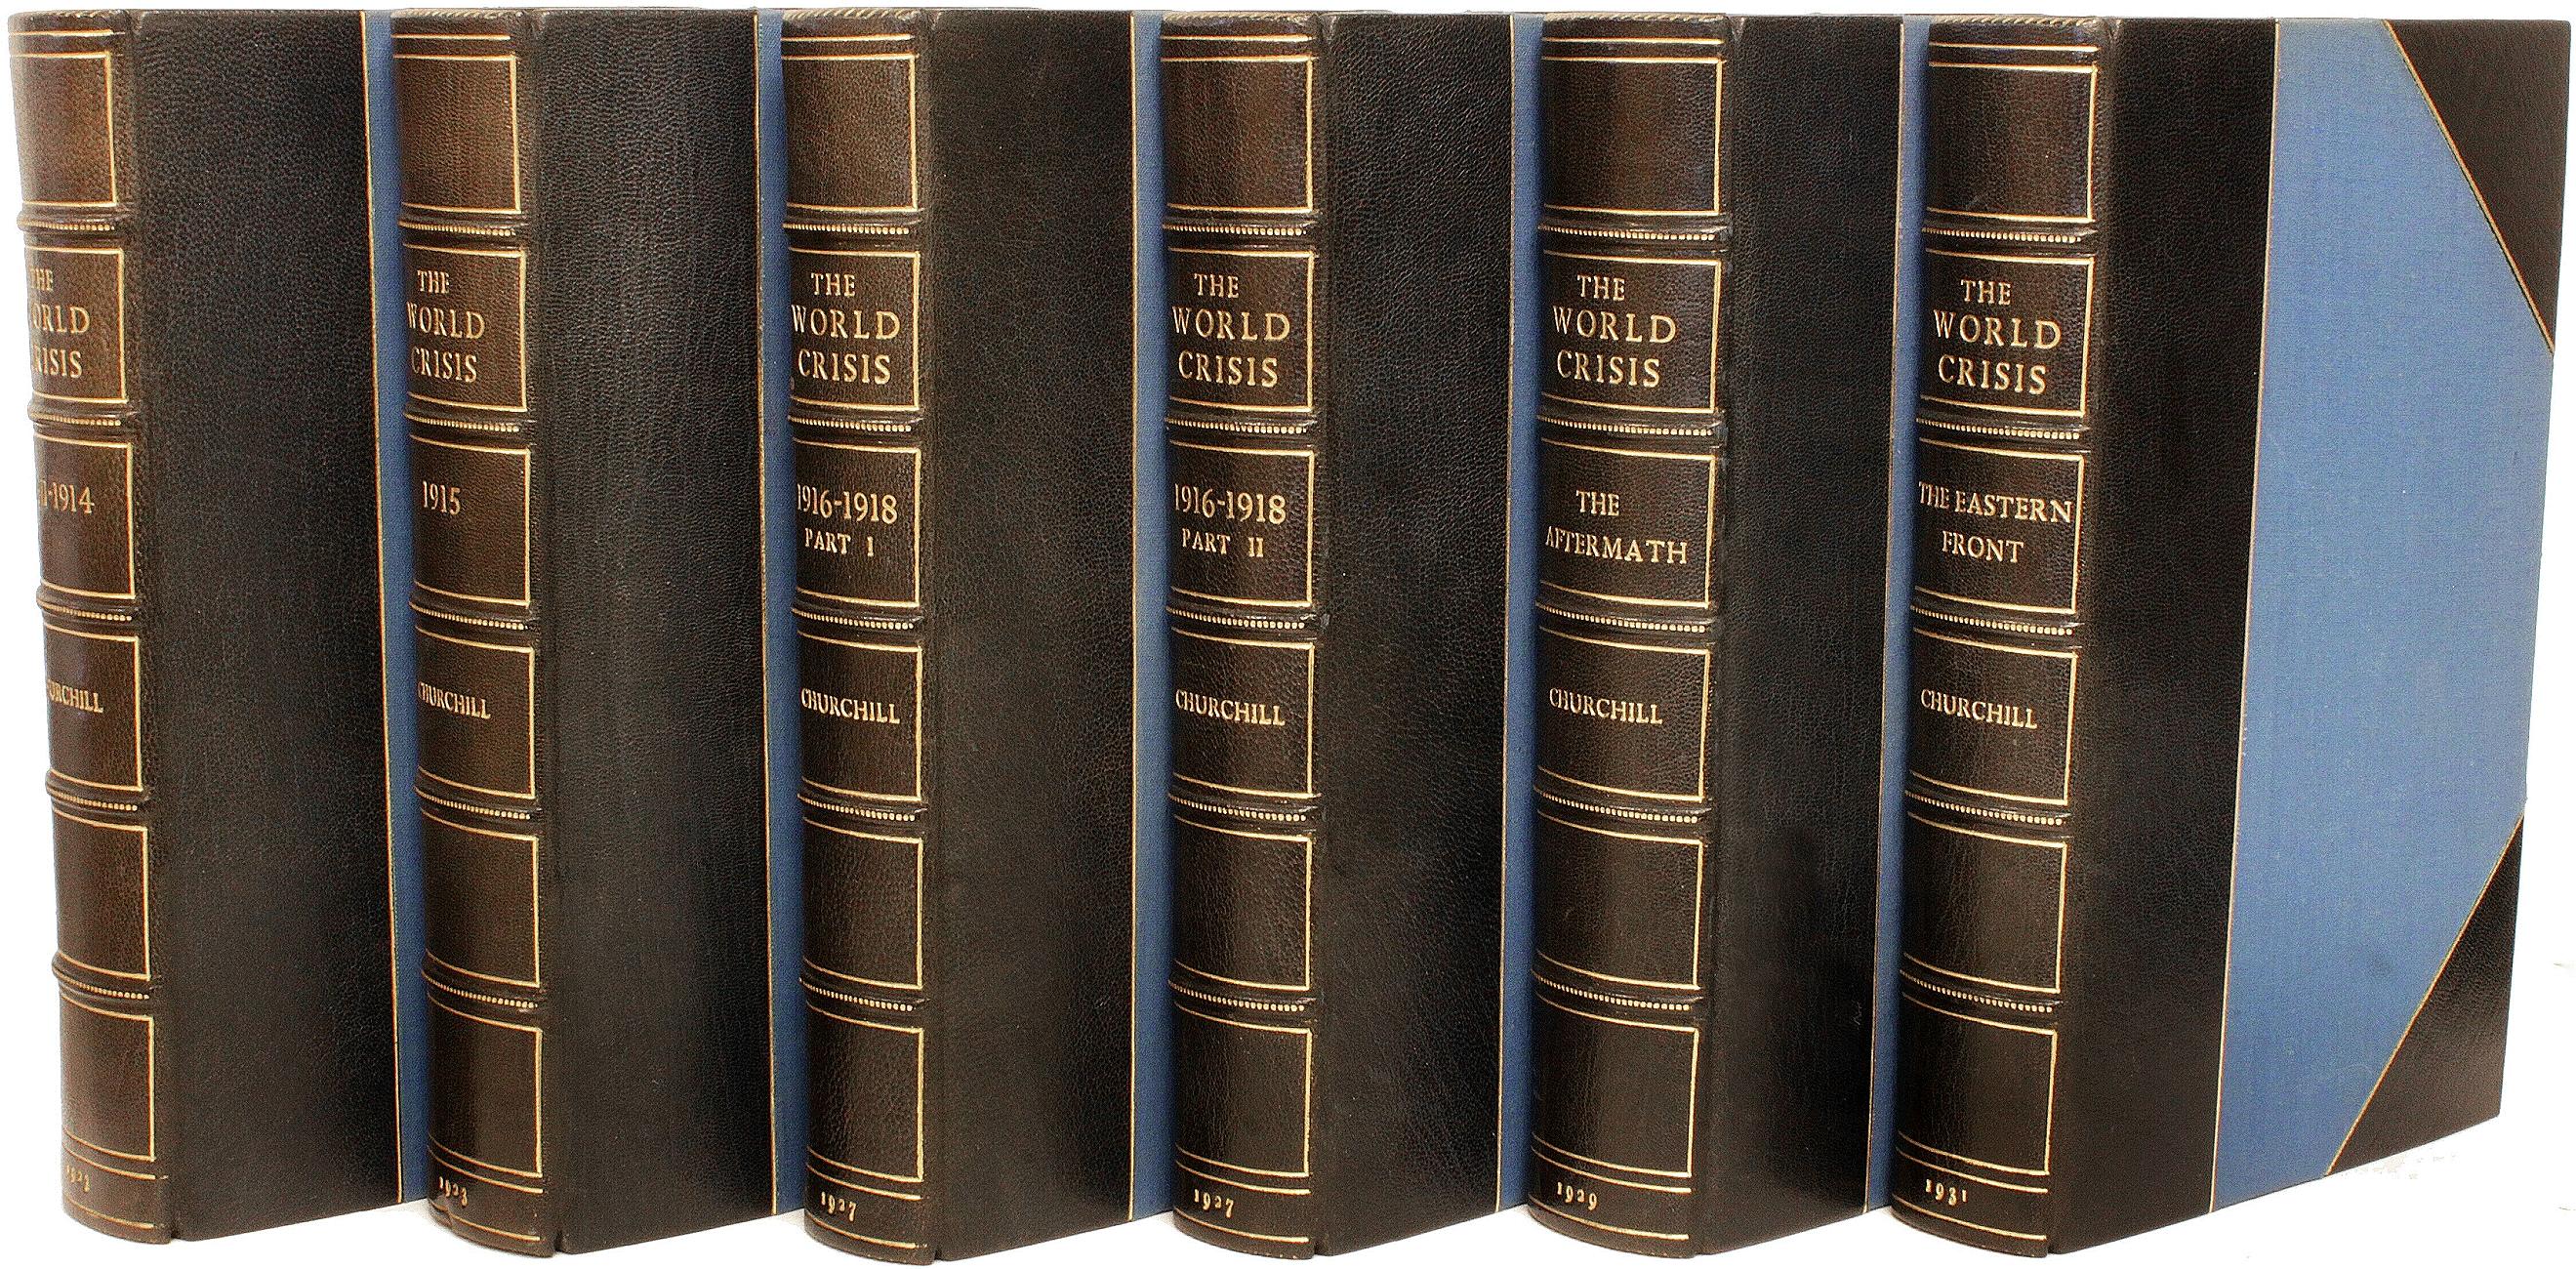 AUTHOR: CHURCHILL, Winston. 

TITLE: The World Crisis. 1911-1918 / The Aftermath / The Eastern Front.

PUBLISHER: London: Thornton Butterworth, Ltd., 1923-1931.

DESCRIPTION: ALL FIRST EDITIONS. 6 vols., 9-1/8